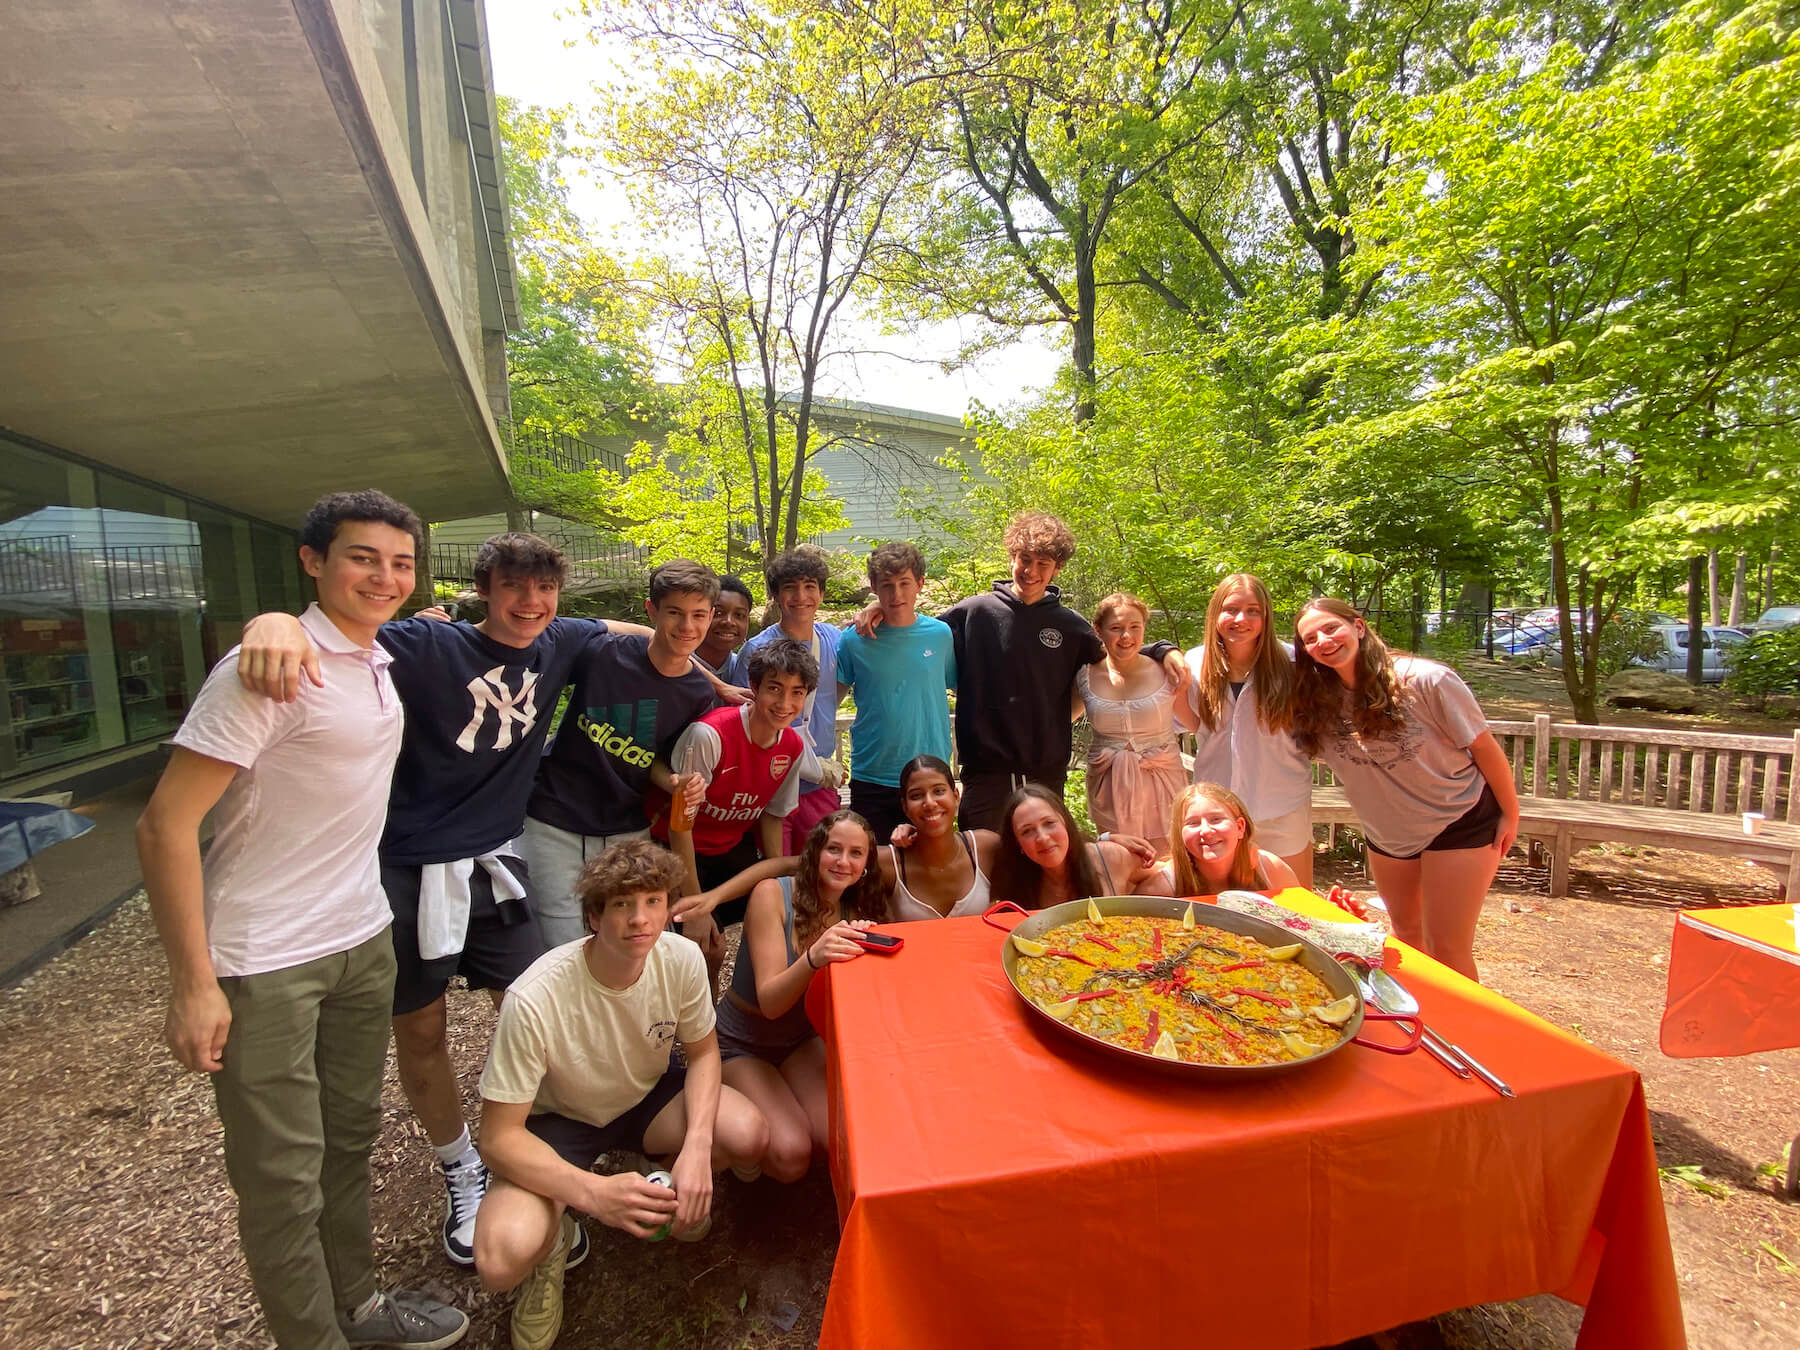 Ethical Culture Fieldston School Upper School students enjoy a new cultural culinary experience